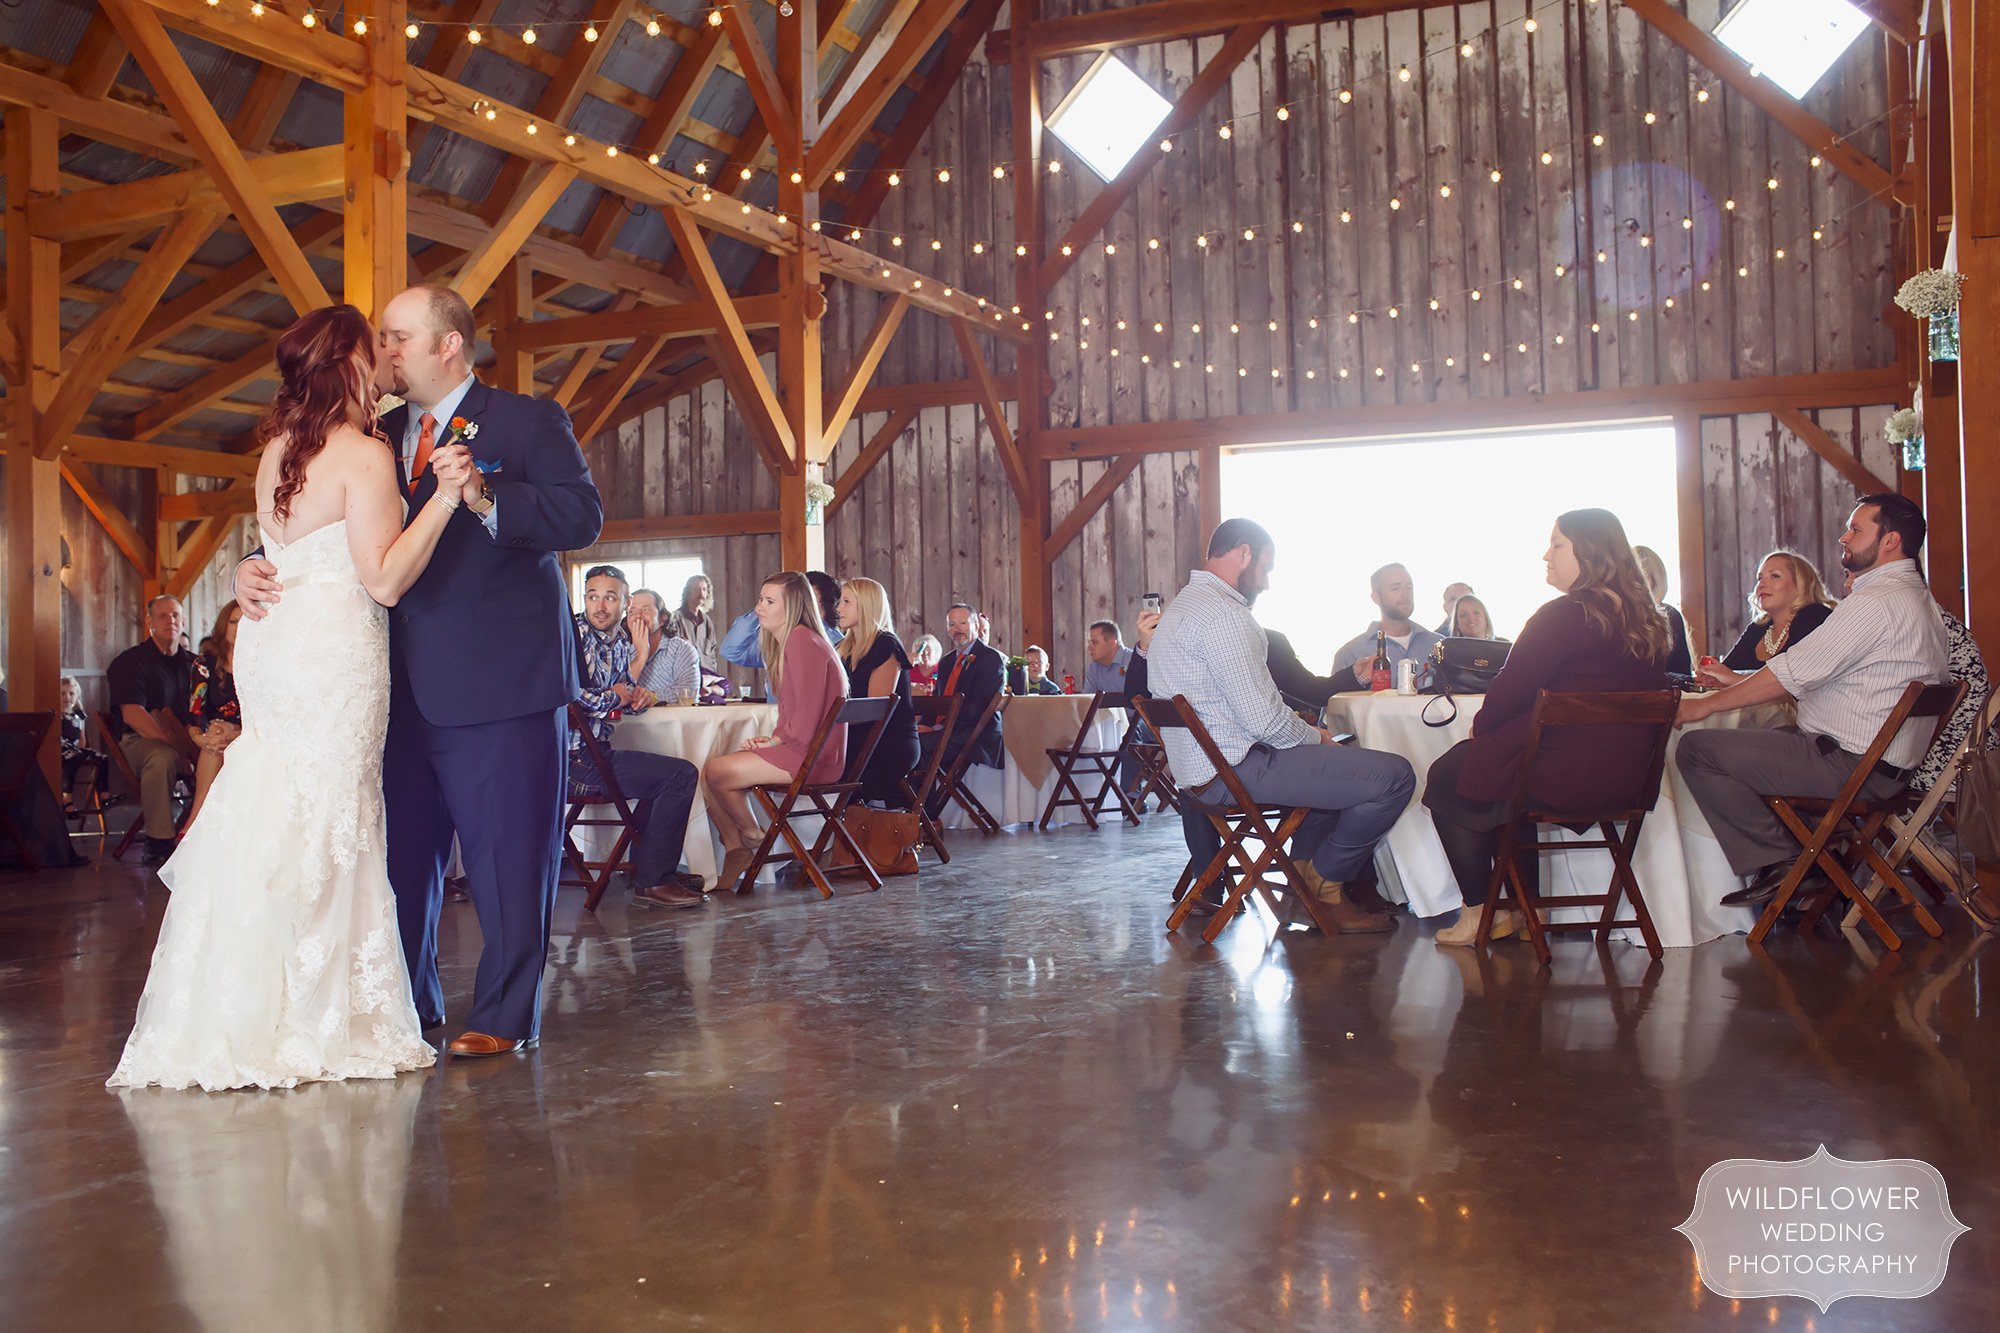 The bride and groom kiss during their first dance at this barn wedding reception just north of KC, MO.